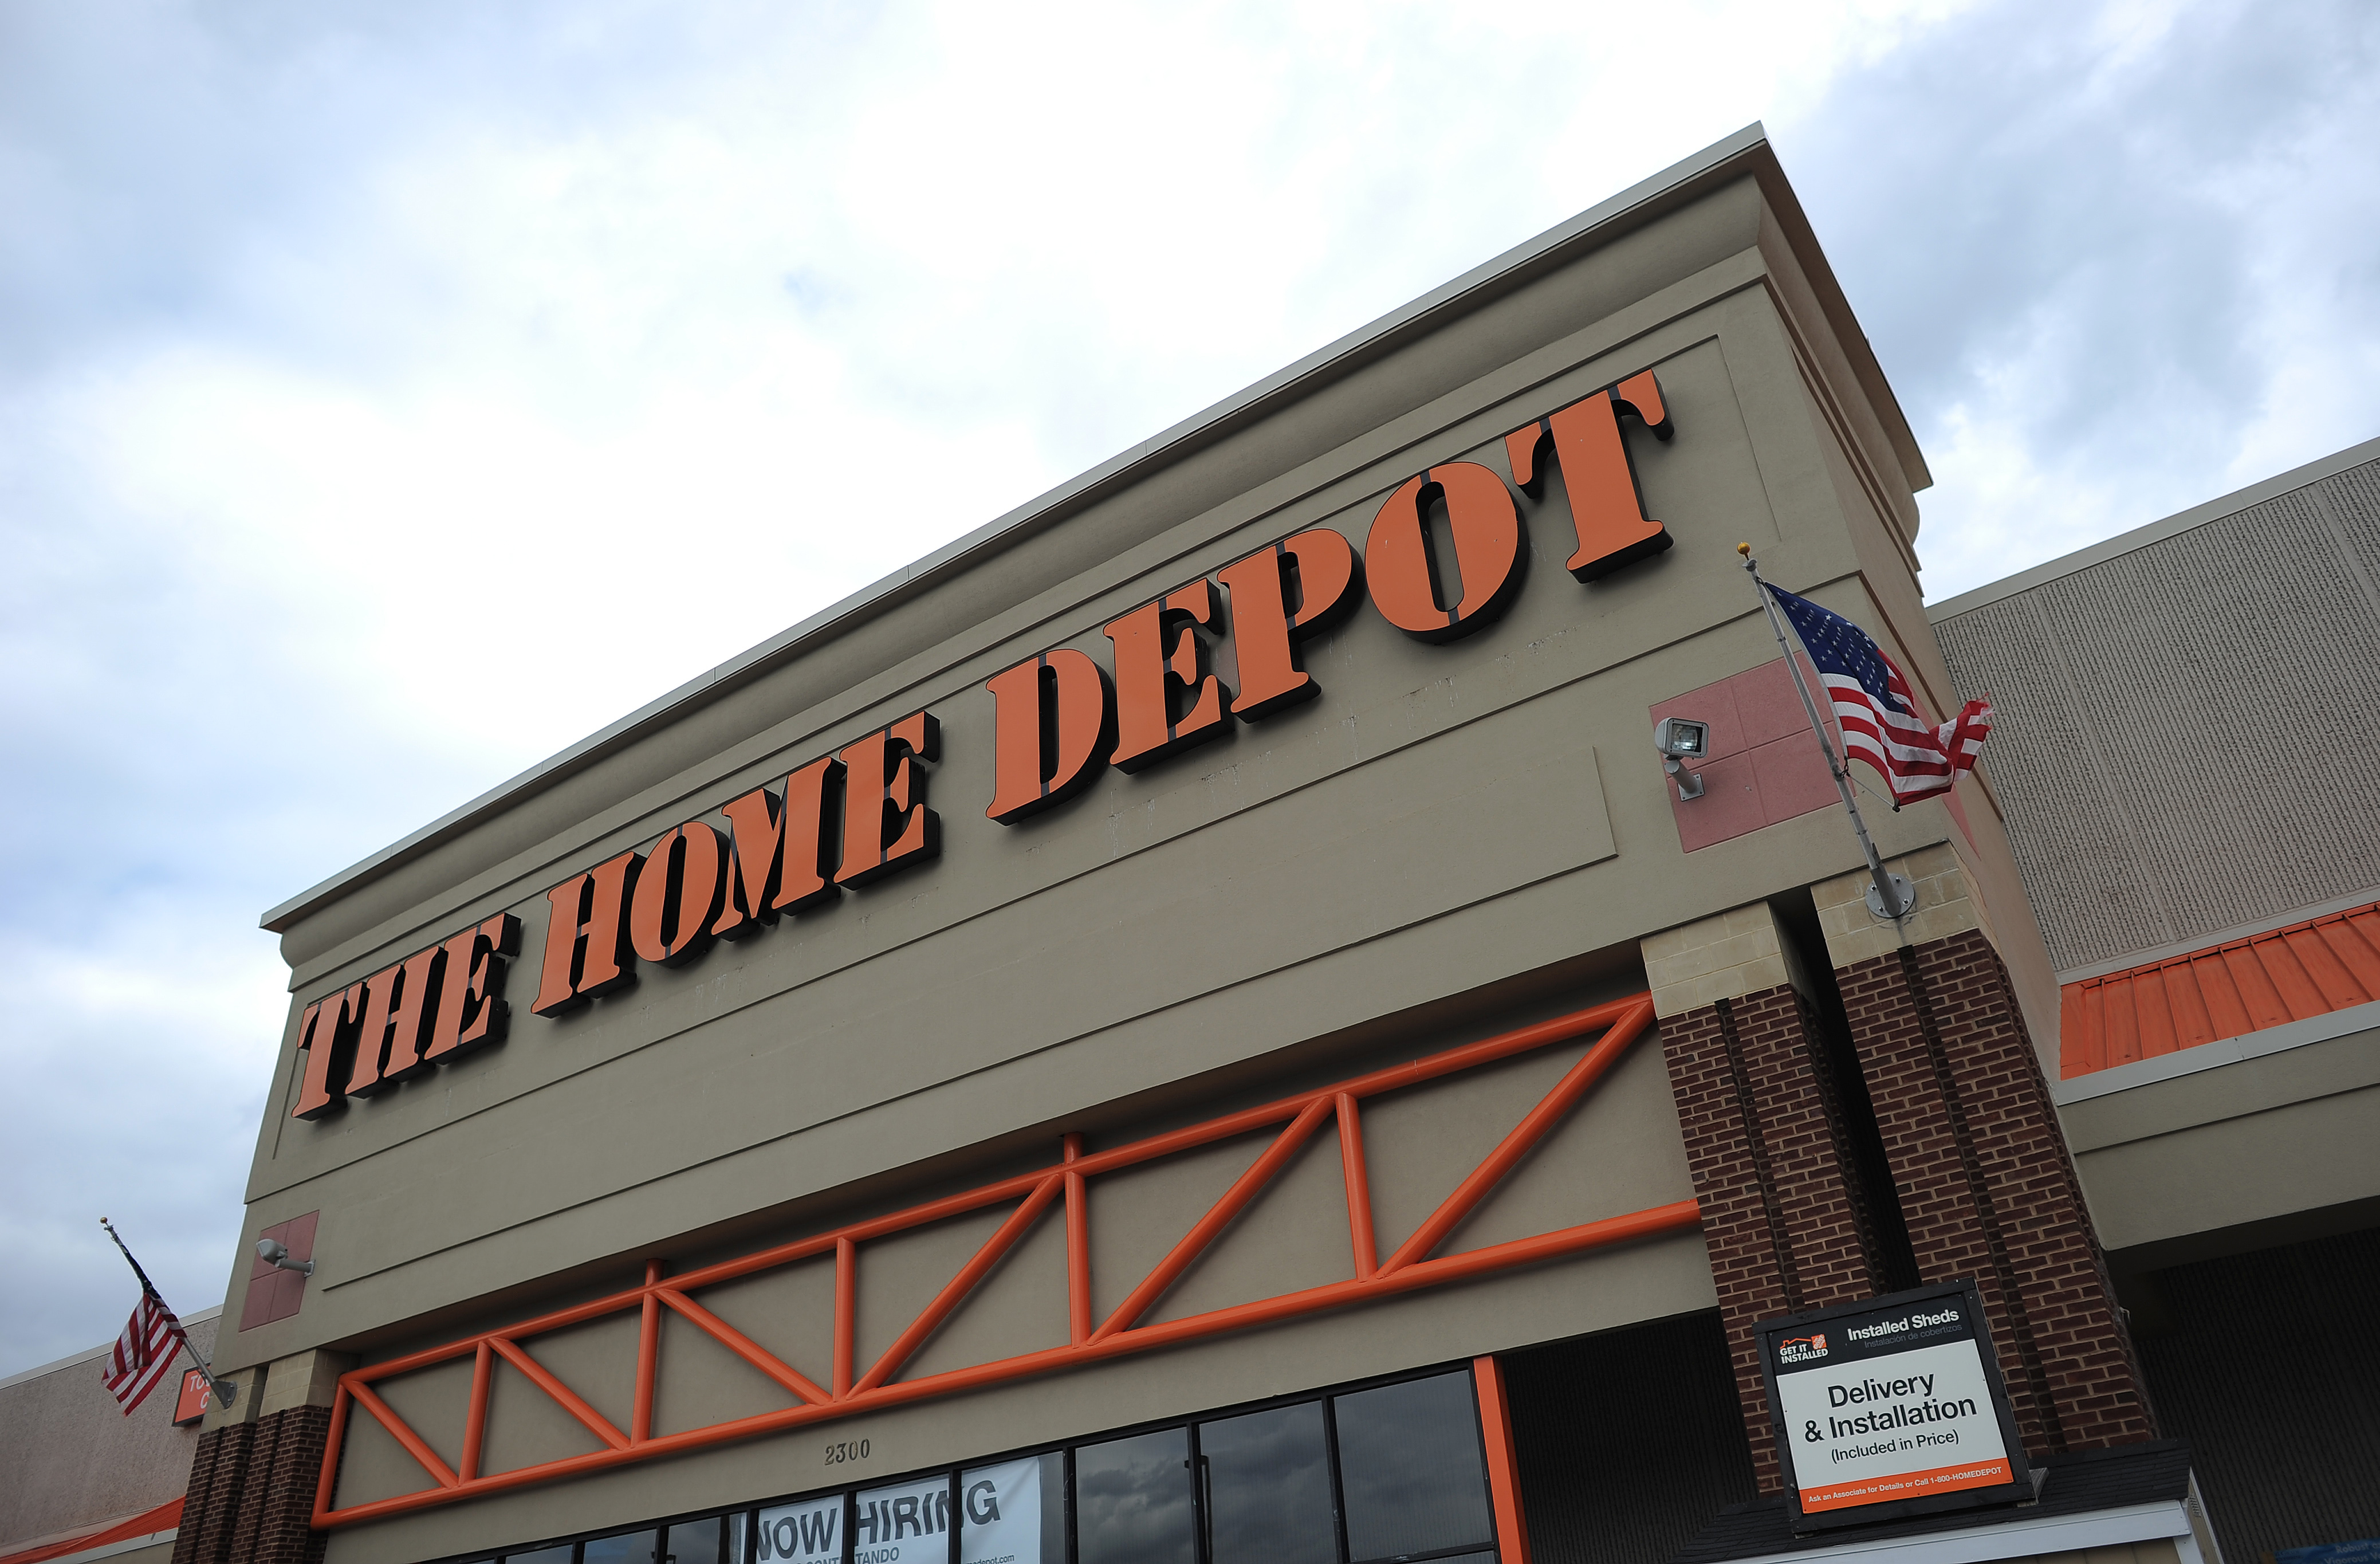 Home Depot To Close Hot Dog Stands At All Michigan Stores - CBS Detroit